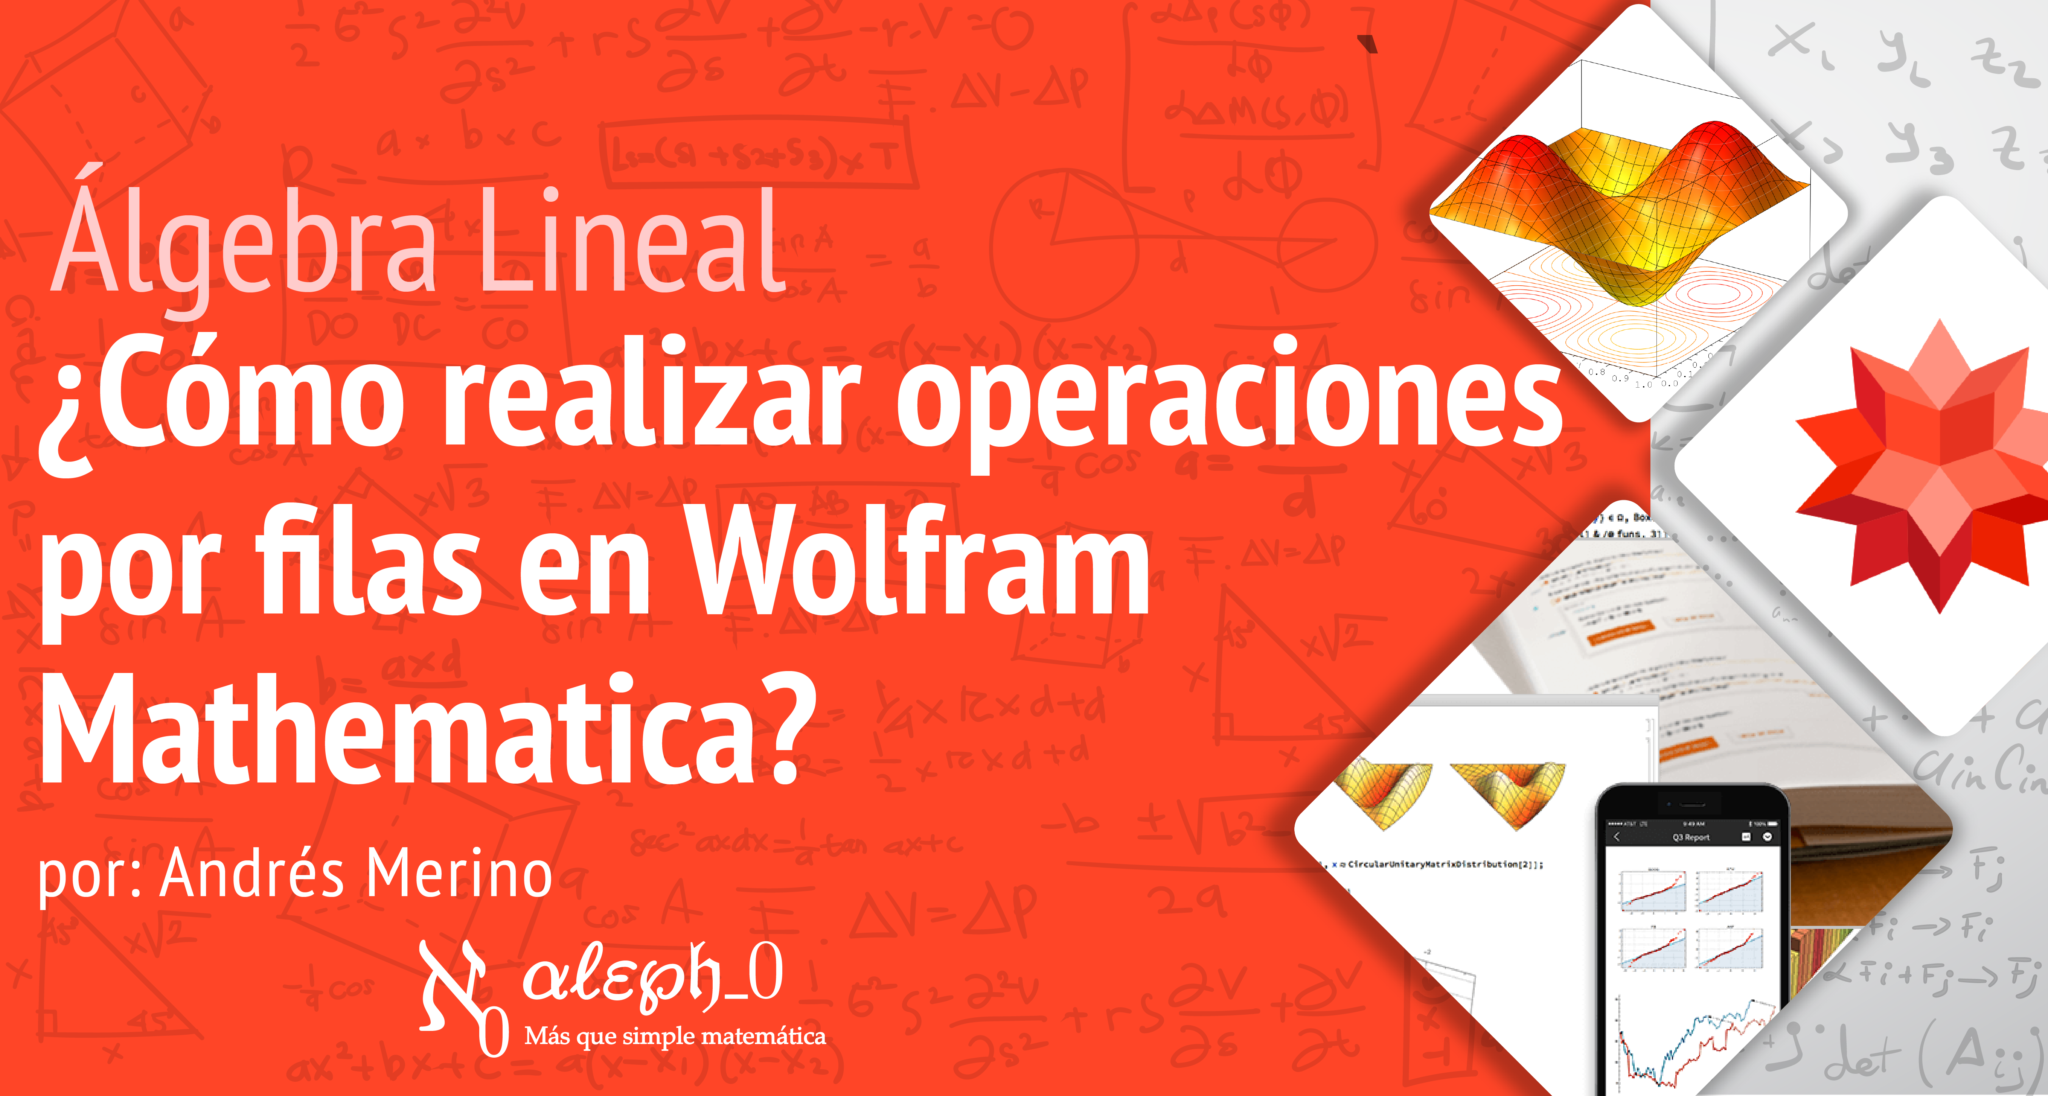 Wolfram Mathematica 13.3.0 instal the new version for android